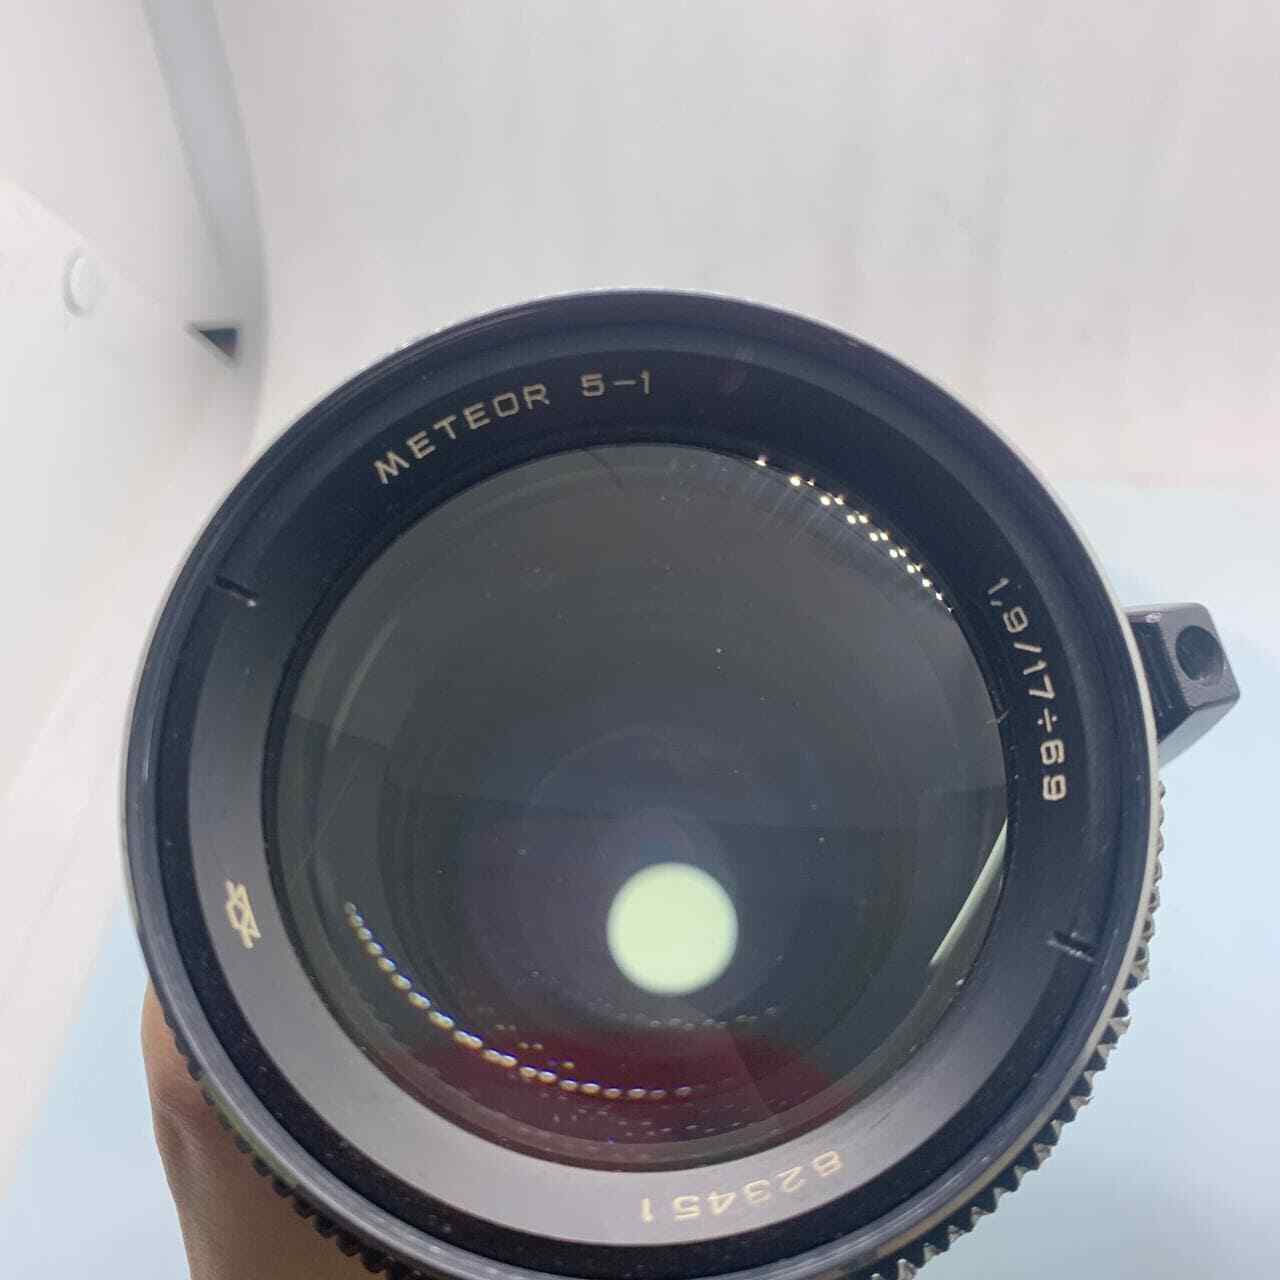 Meteor 5-1 lens 17-69mm/1.9 Zoom M42 ARRI PL Canon EF mount Red One BMPCC Aaton